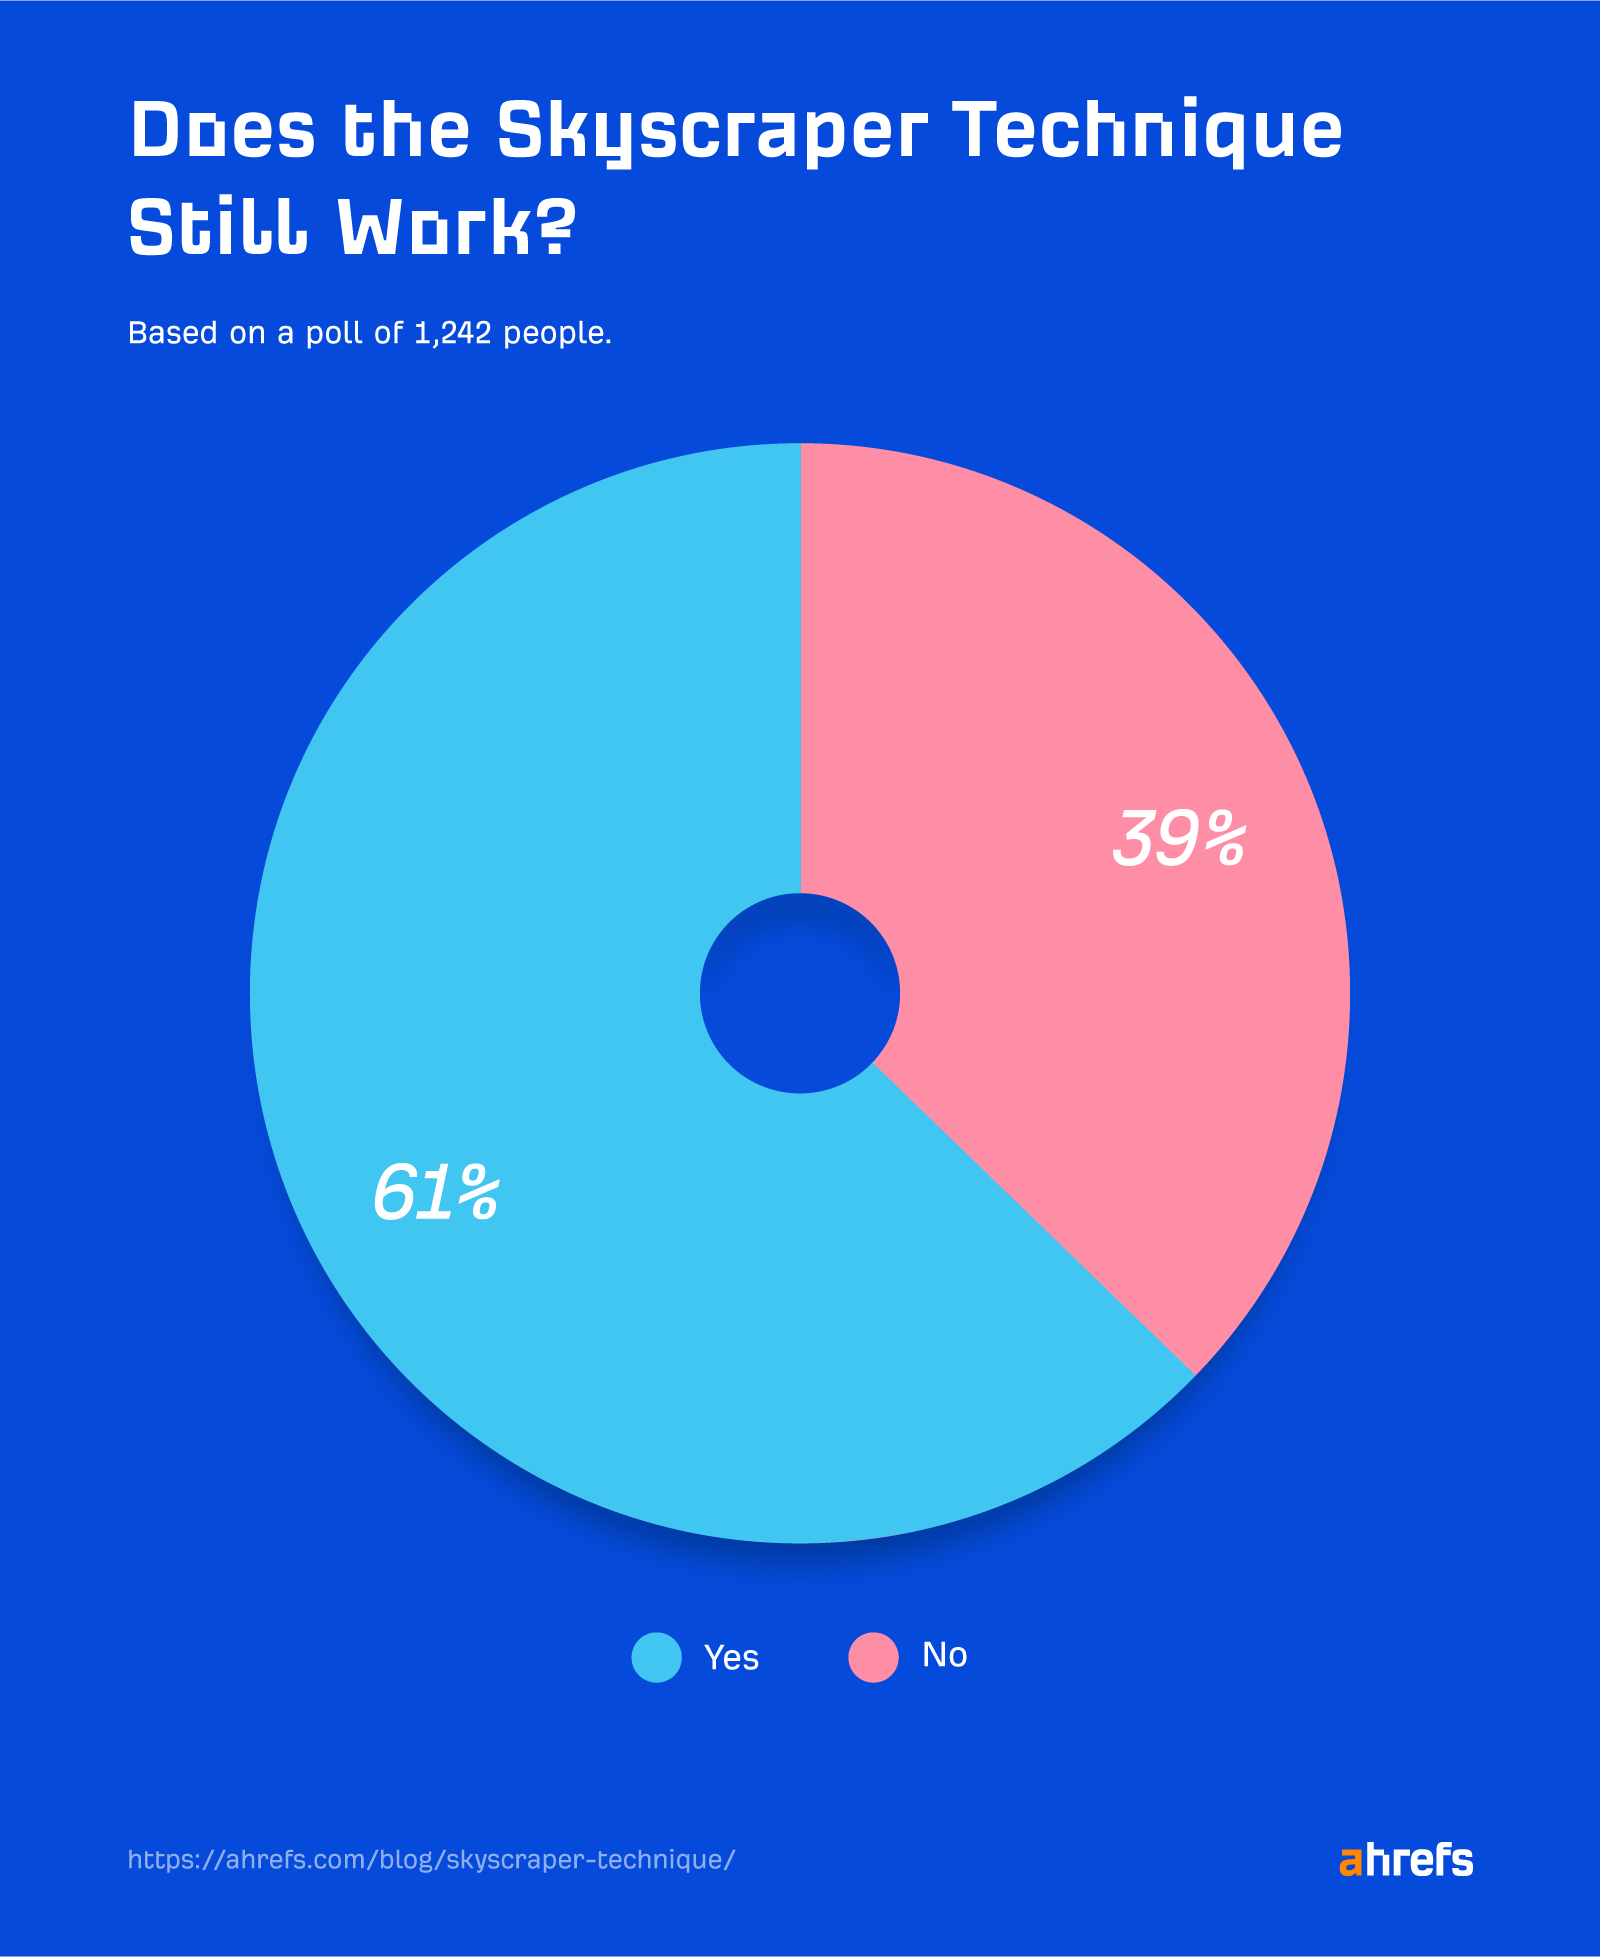 Pie chart showing 61% of respondents feel the Skyscraper Technique still works